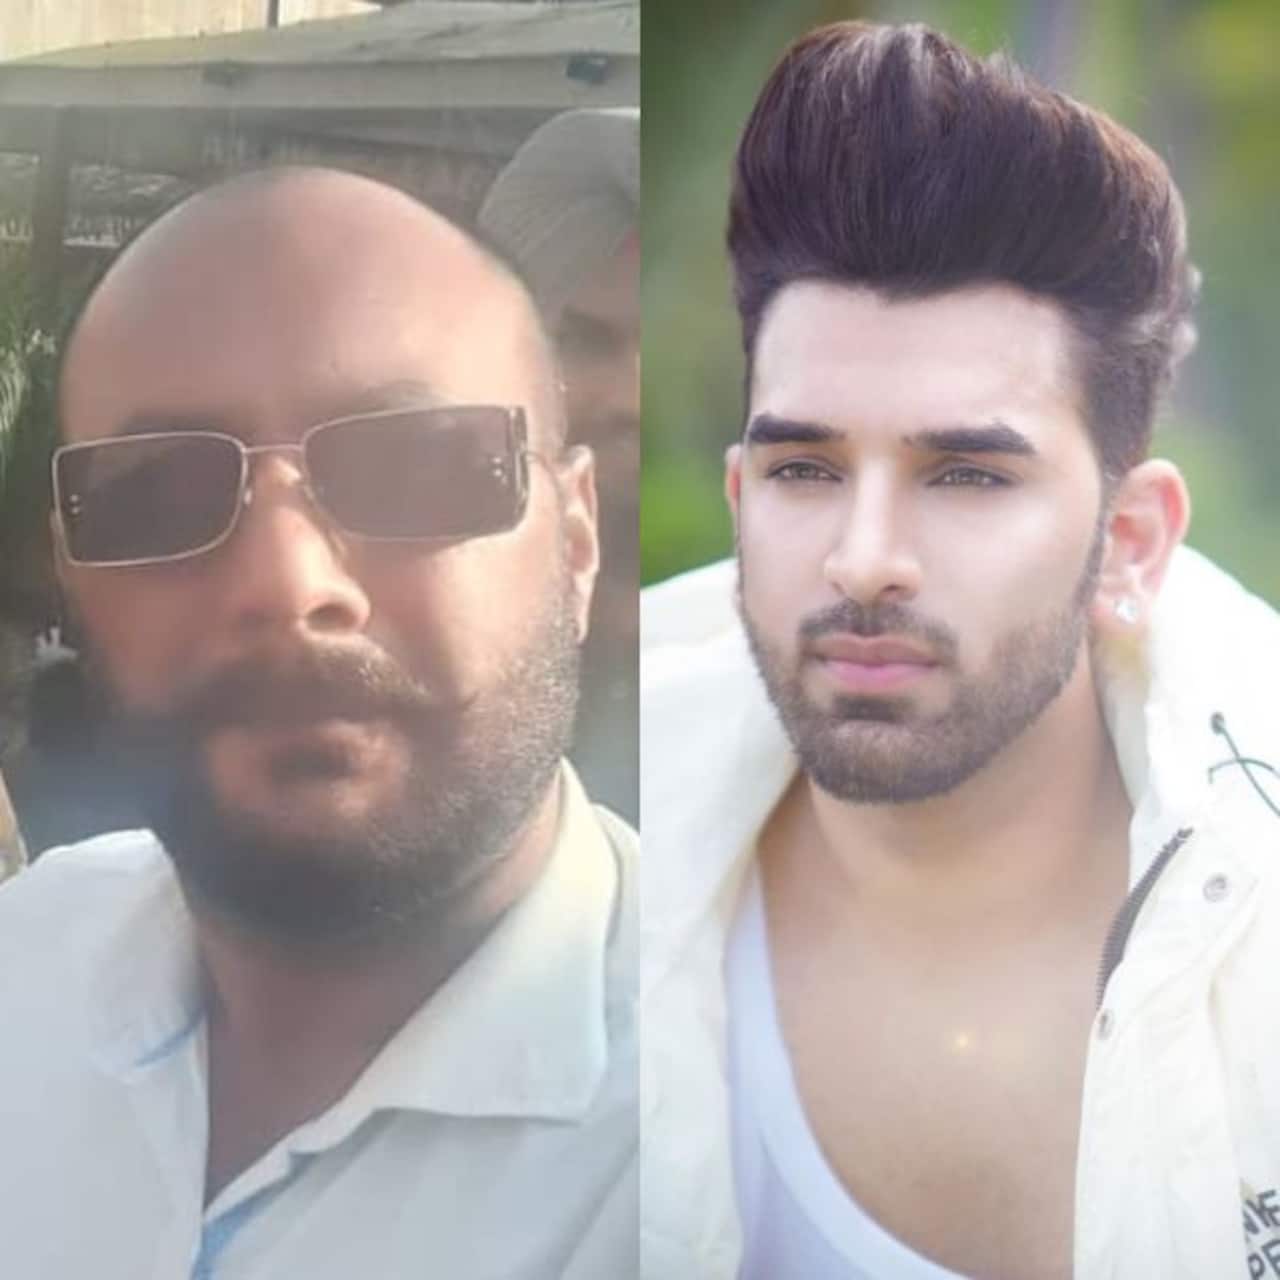 Bigg Boss 14's Paras Chhabra hits out at Shehnaaz Gill's father and brother  after they poked fun at his hair patch